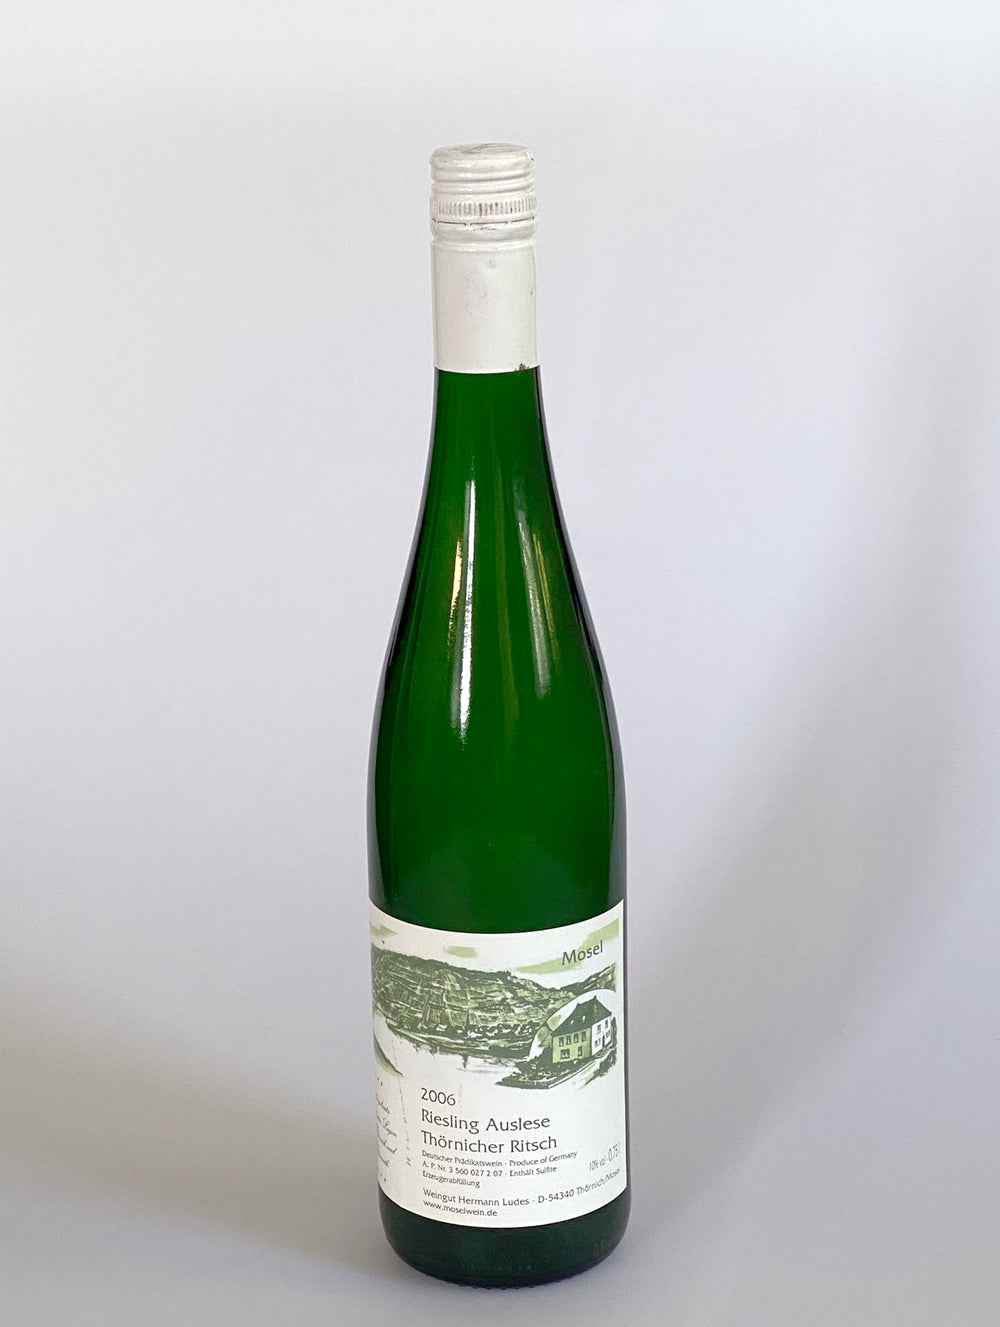 2006 Ludes Thornicher Ritsch Auslese Riesling